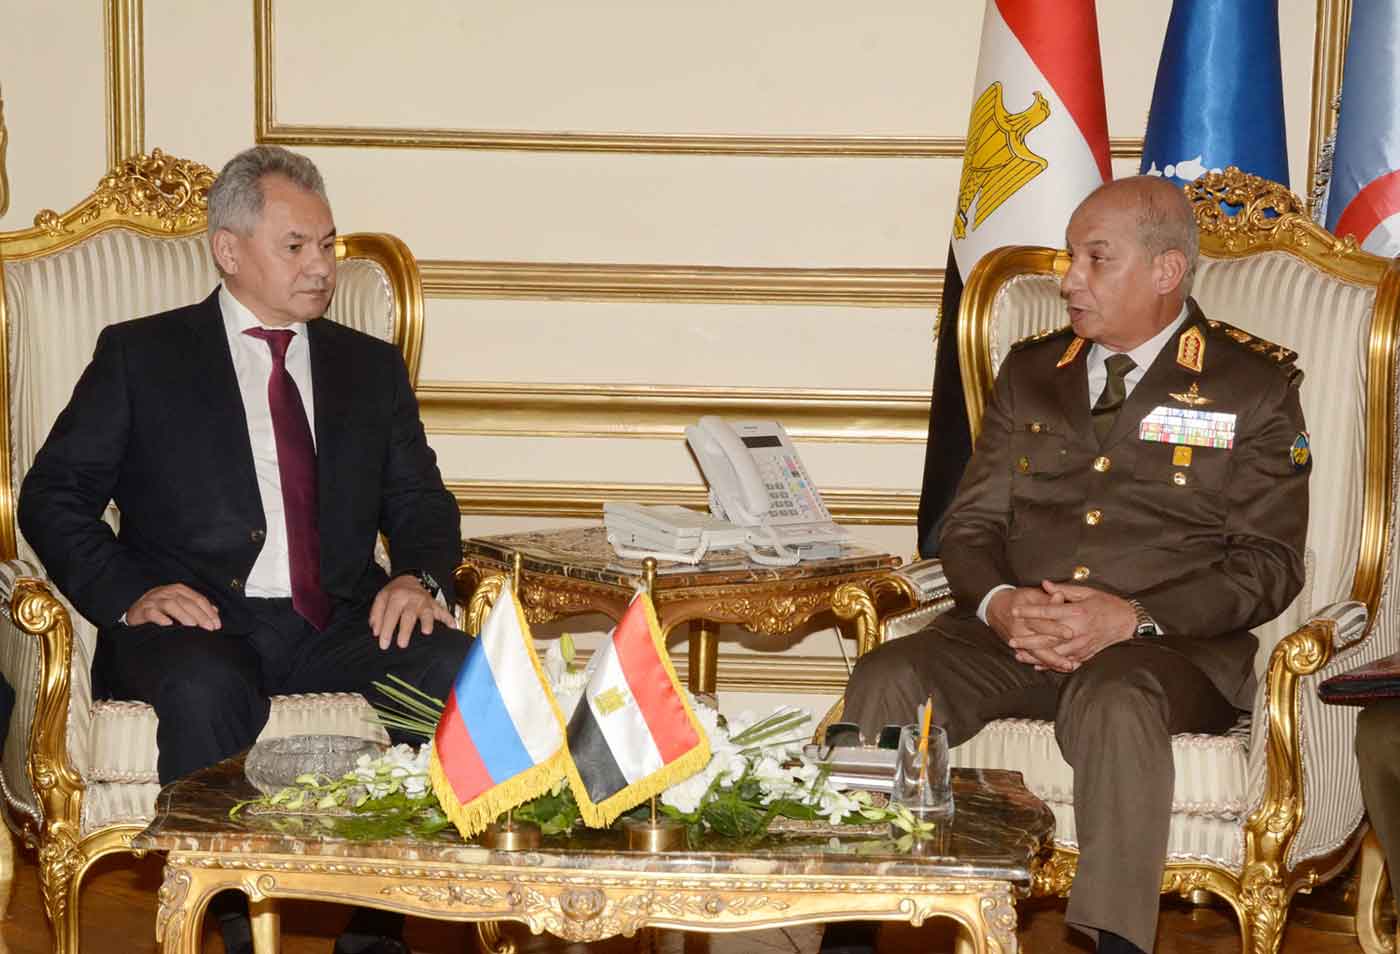 Egypts-Minister-of-Defense-and-Military-Production-Mohamed-Zaki-meeting-his-Russian-counterpart-Sergey-Shoygu.jpg